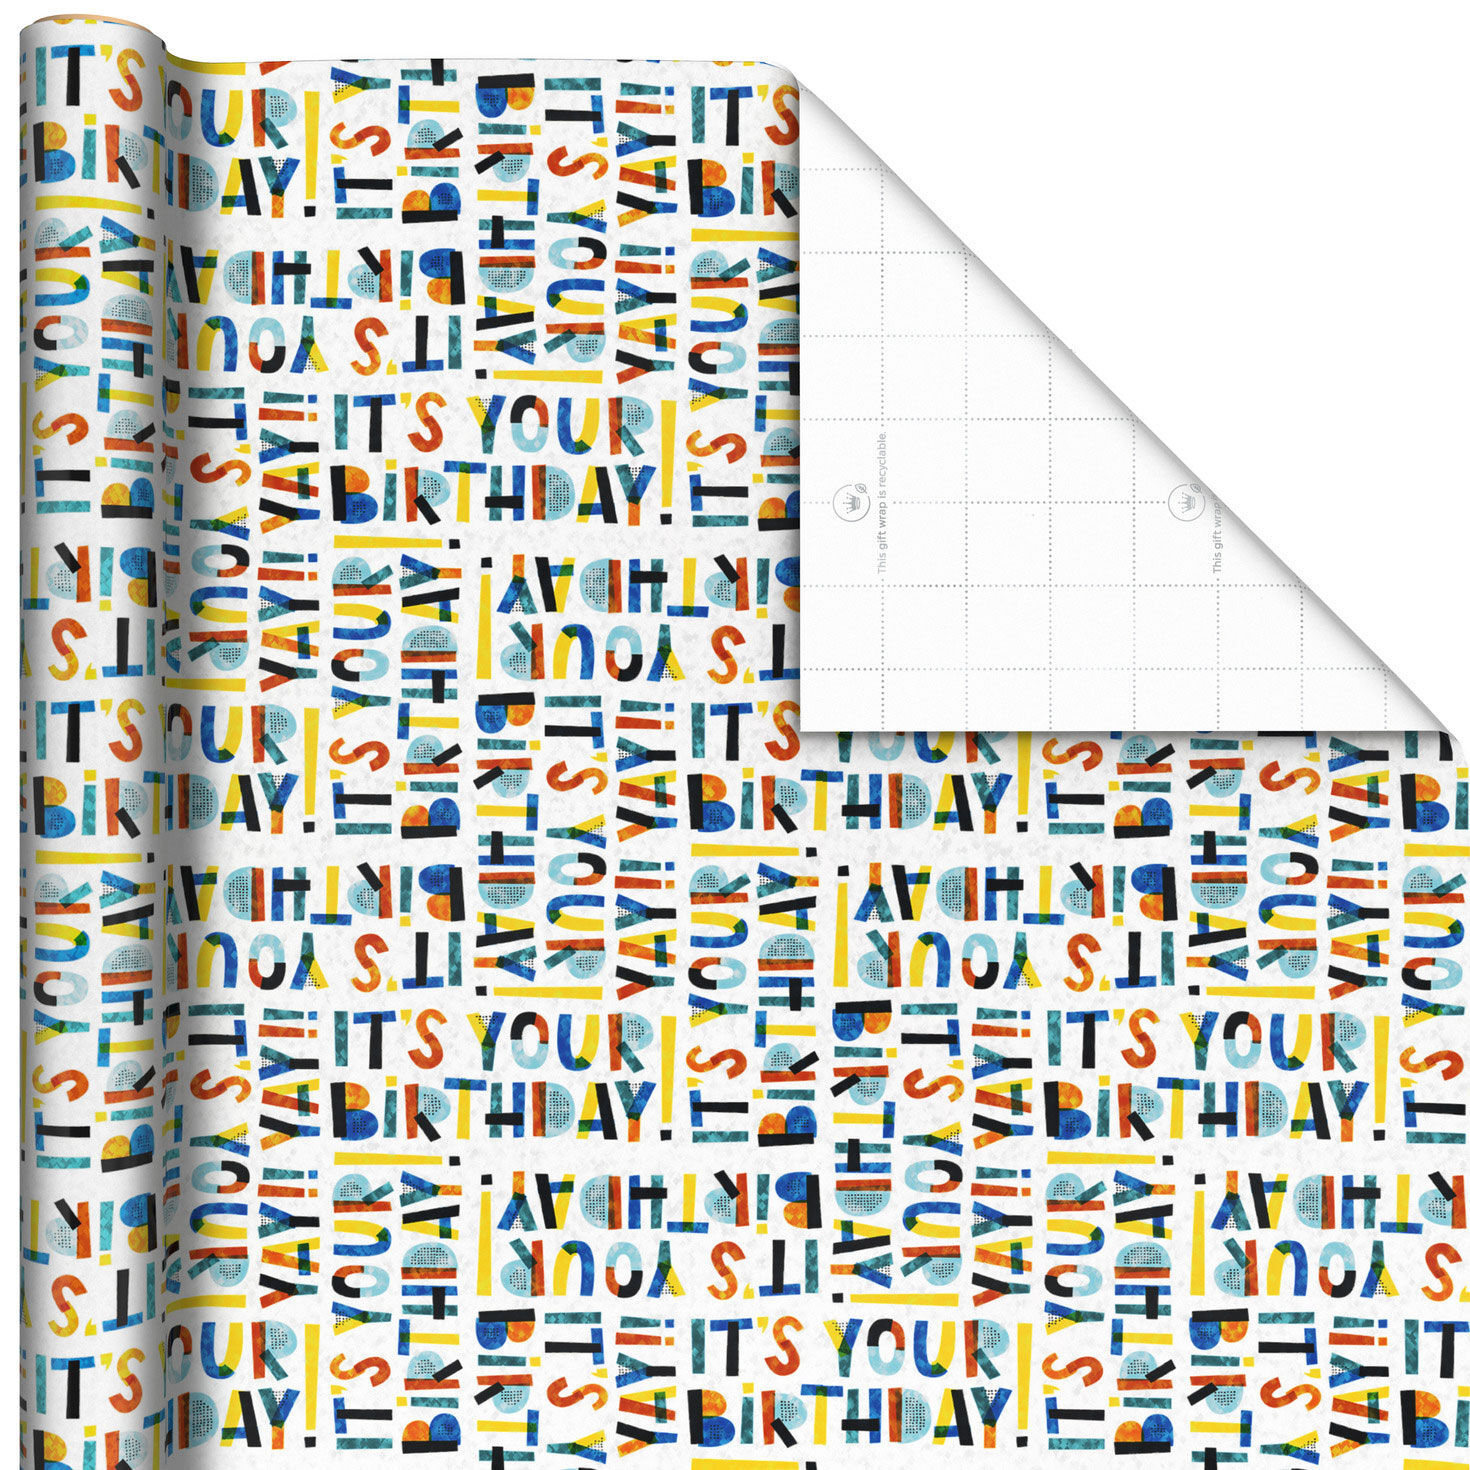 It's Your Birthday! Jumbo Wrapping Paper, 90 sq. ft. for only USD 9.99 | Hallmark